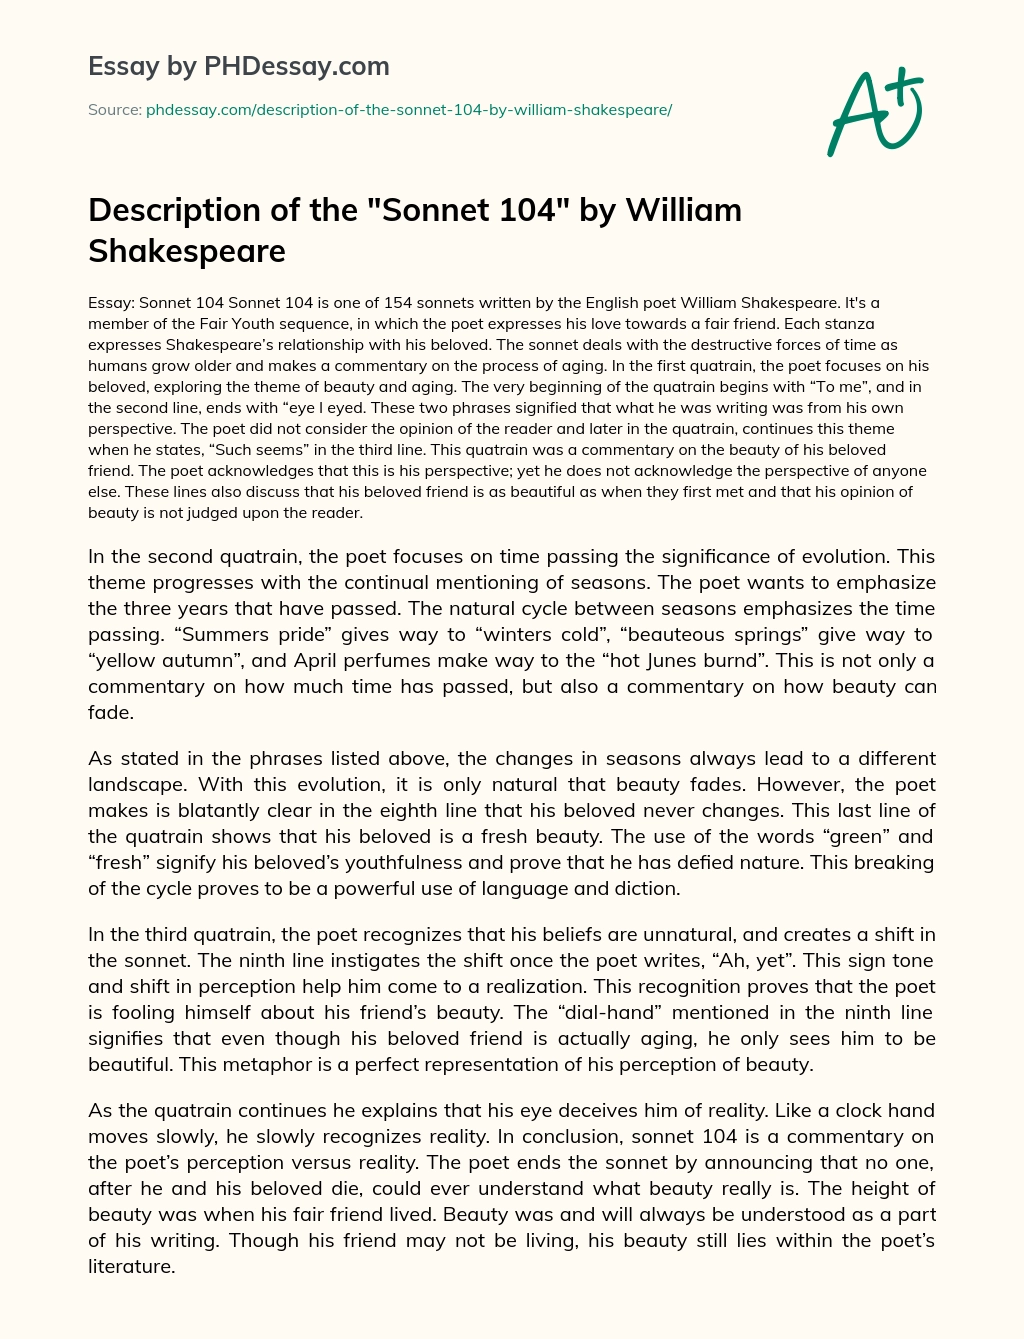 Description of the Sonnet 104 by William Shakespeare essay